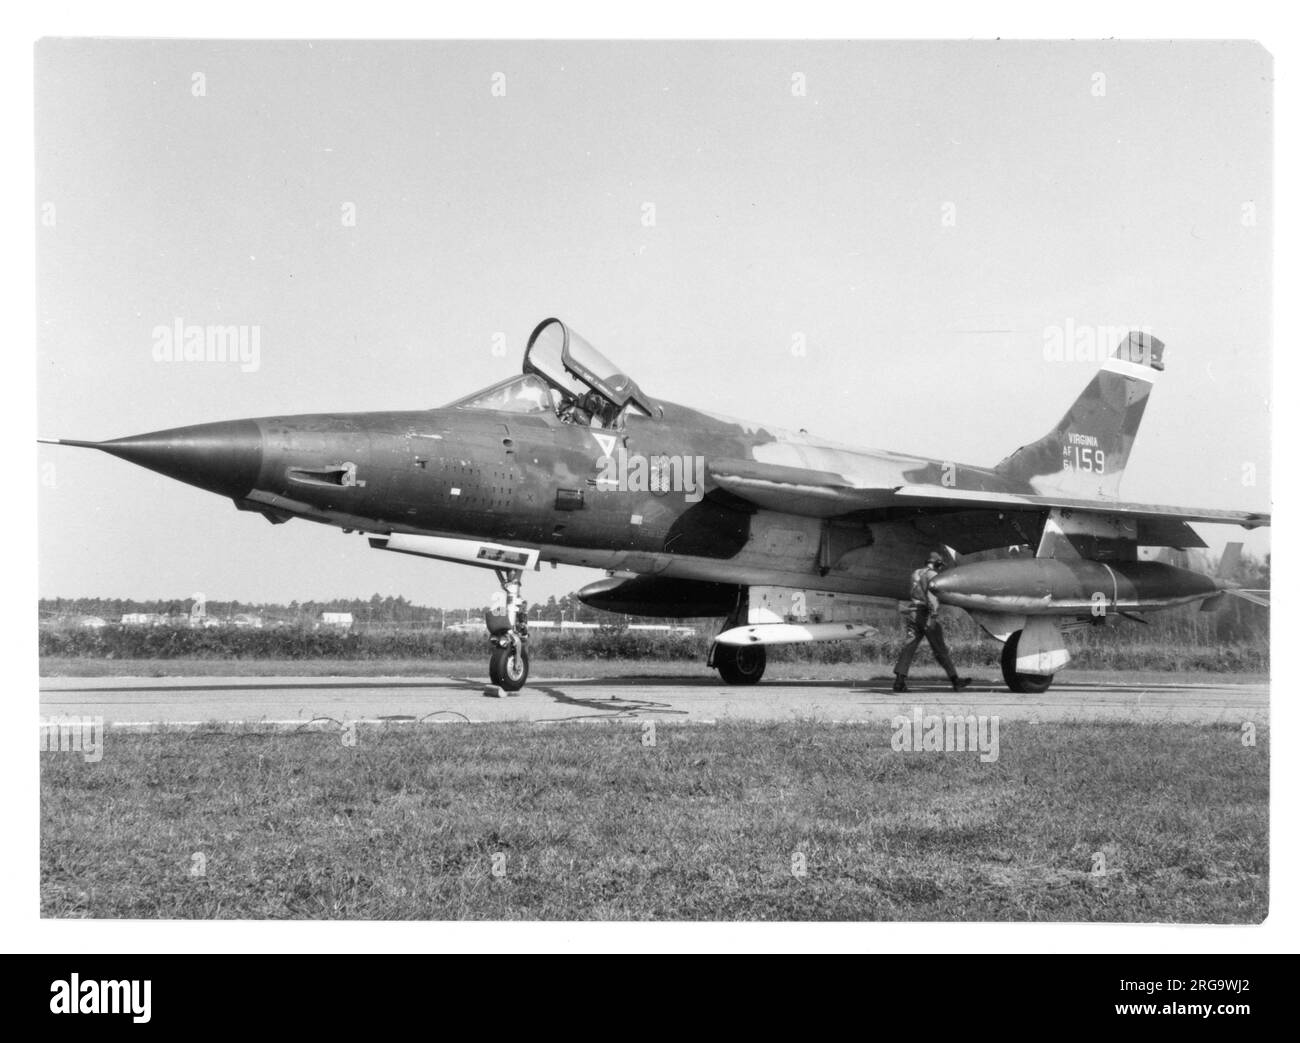 Virginia Air National Guard - Republic F-105D Thunderchief 61-0159 (msn D354) of the 149th Tactical Fighter Squadron seen with a 4-round Zuni practice rocket launcher on the bomb door pylon.. In February 1970 '0159' was active with the 354th Tactical Fighter Squadron and named 'Honey Pot II', completing 600 South-East Asia missions, credited with one MiG kill. Now on display at Davis Monthan AFB, Arizona, painted as 62-4284. Stock Photo